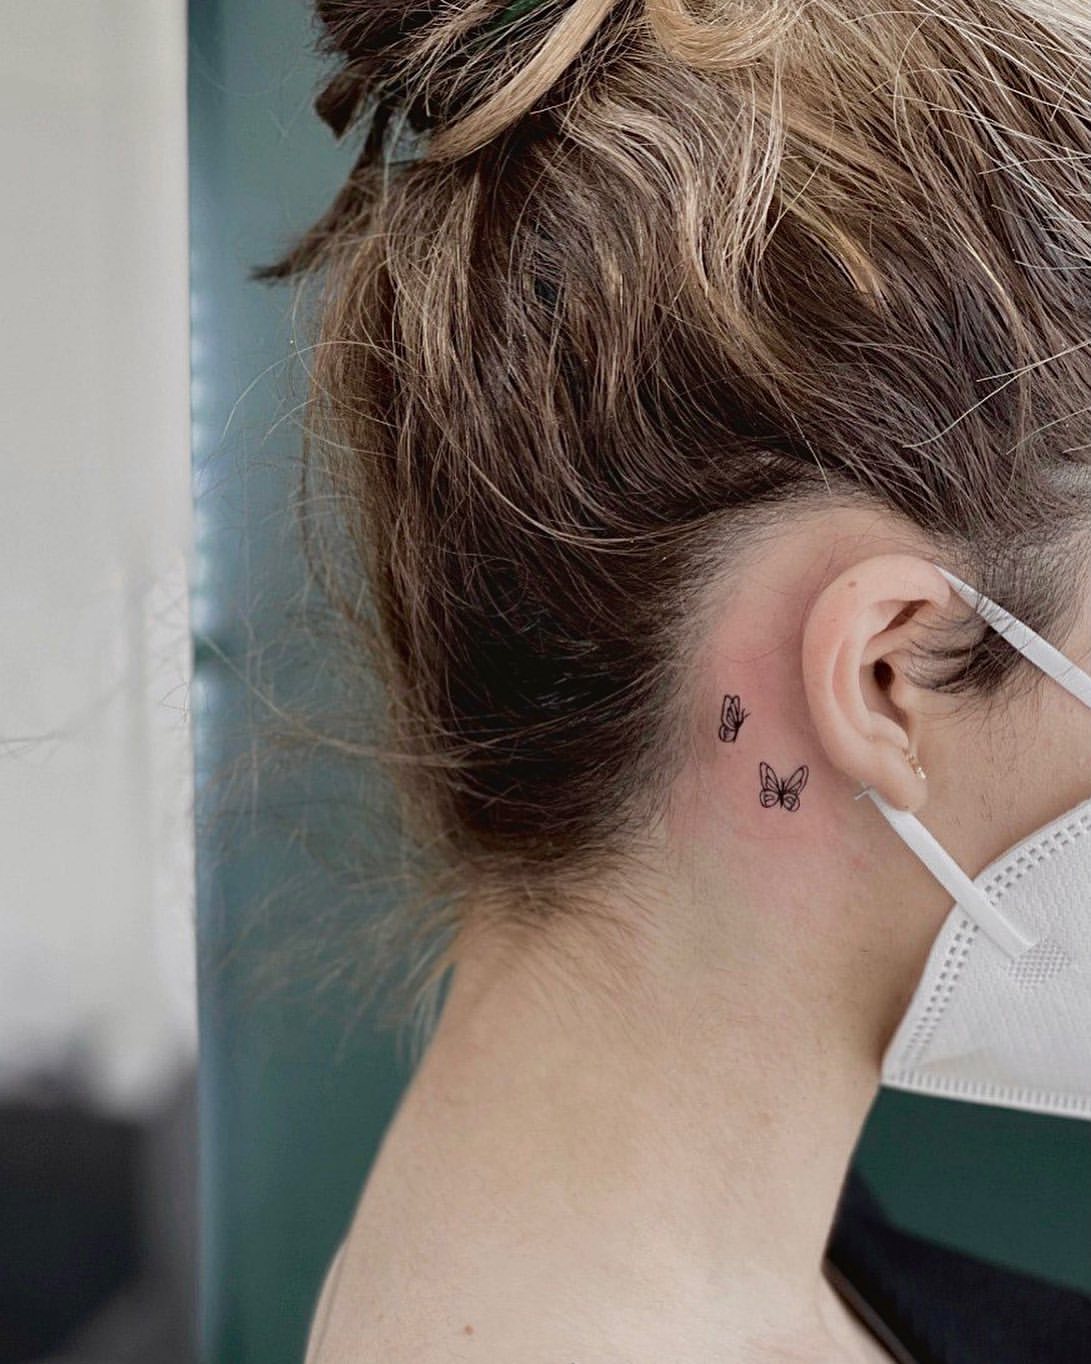 Behind the Ear Tattoos for Women Top 55 Designs Ideas  LadyLife